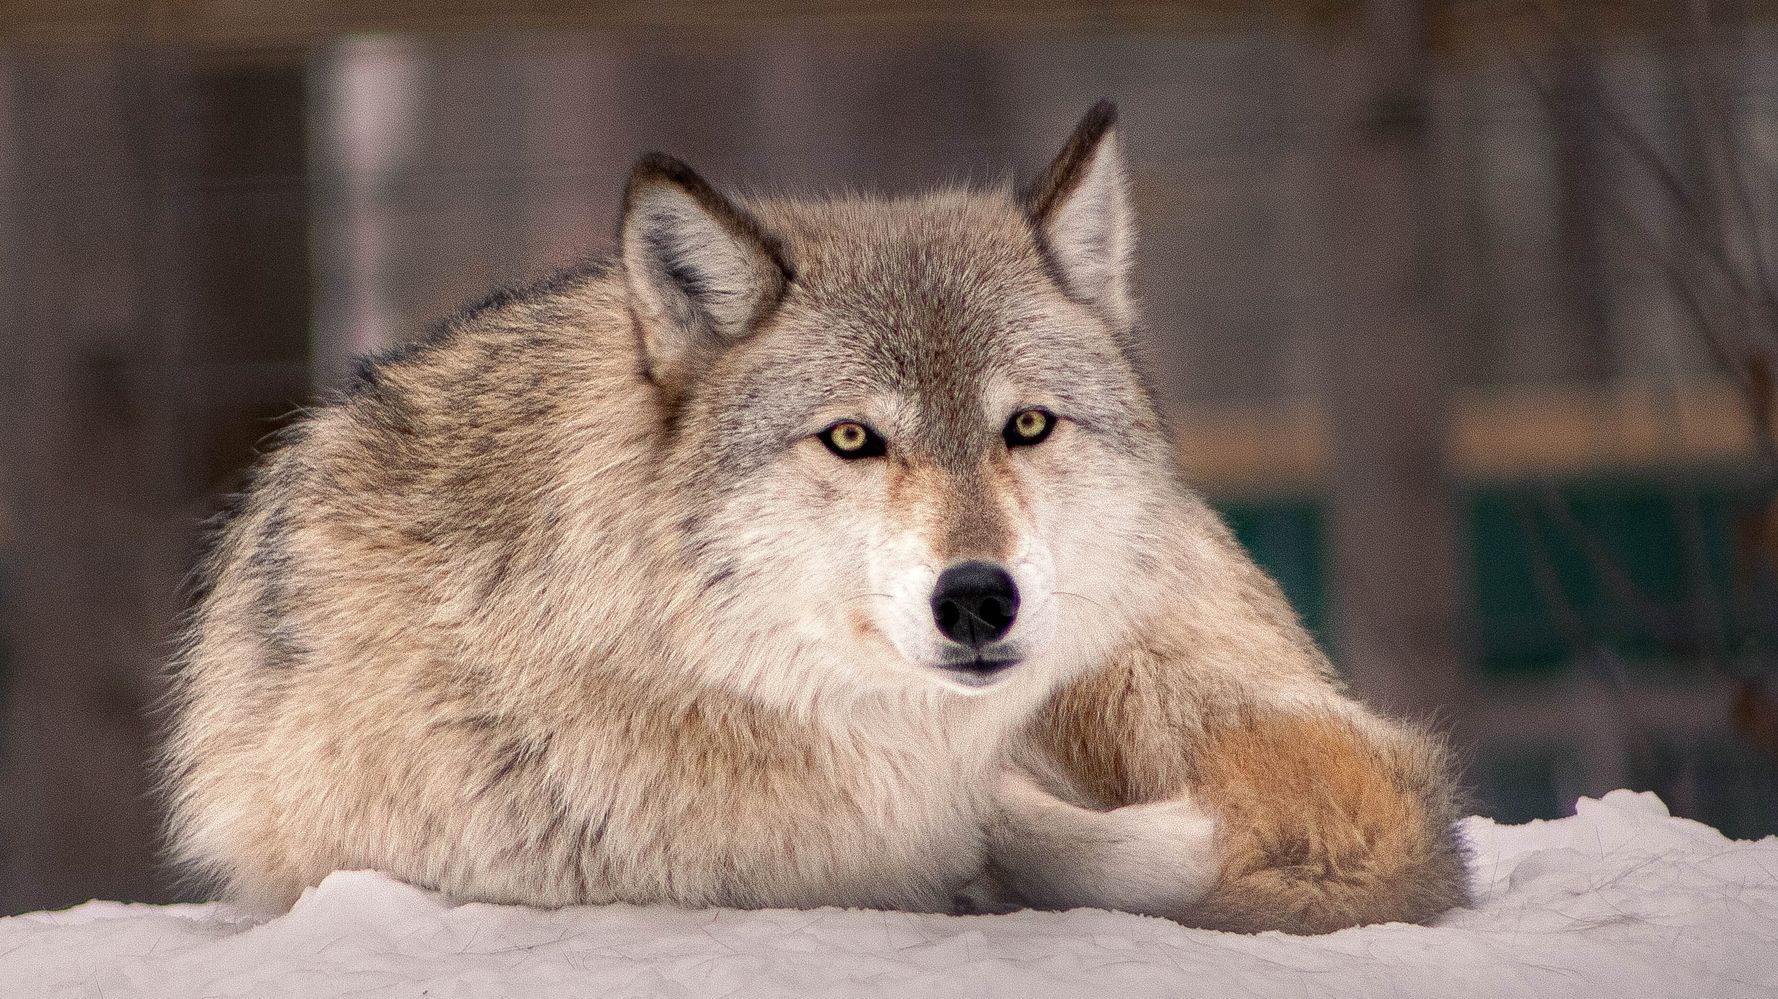 Idaho Gov. Signs Bill To Allow Killing 90% Of State's Wolves